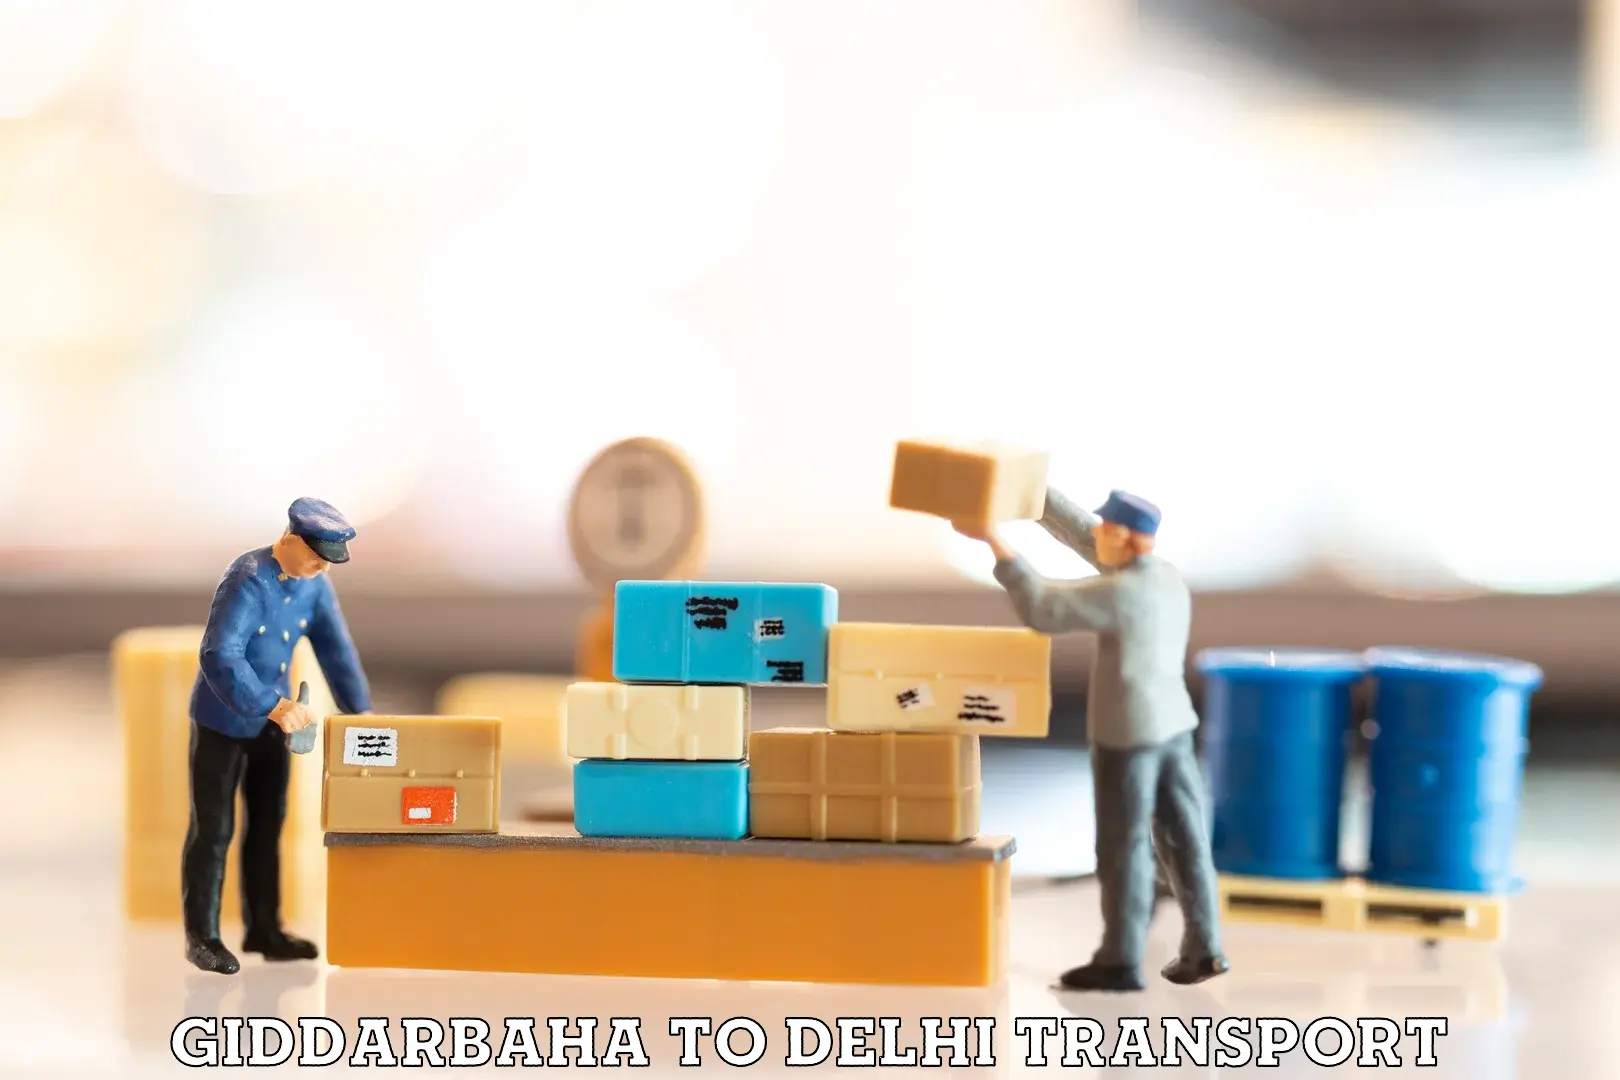 Interstate transport services Giddarbaha to Lodhi Road